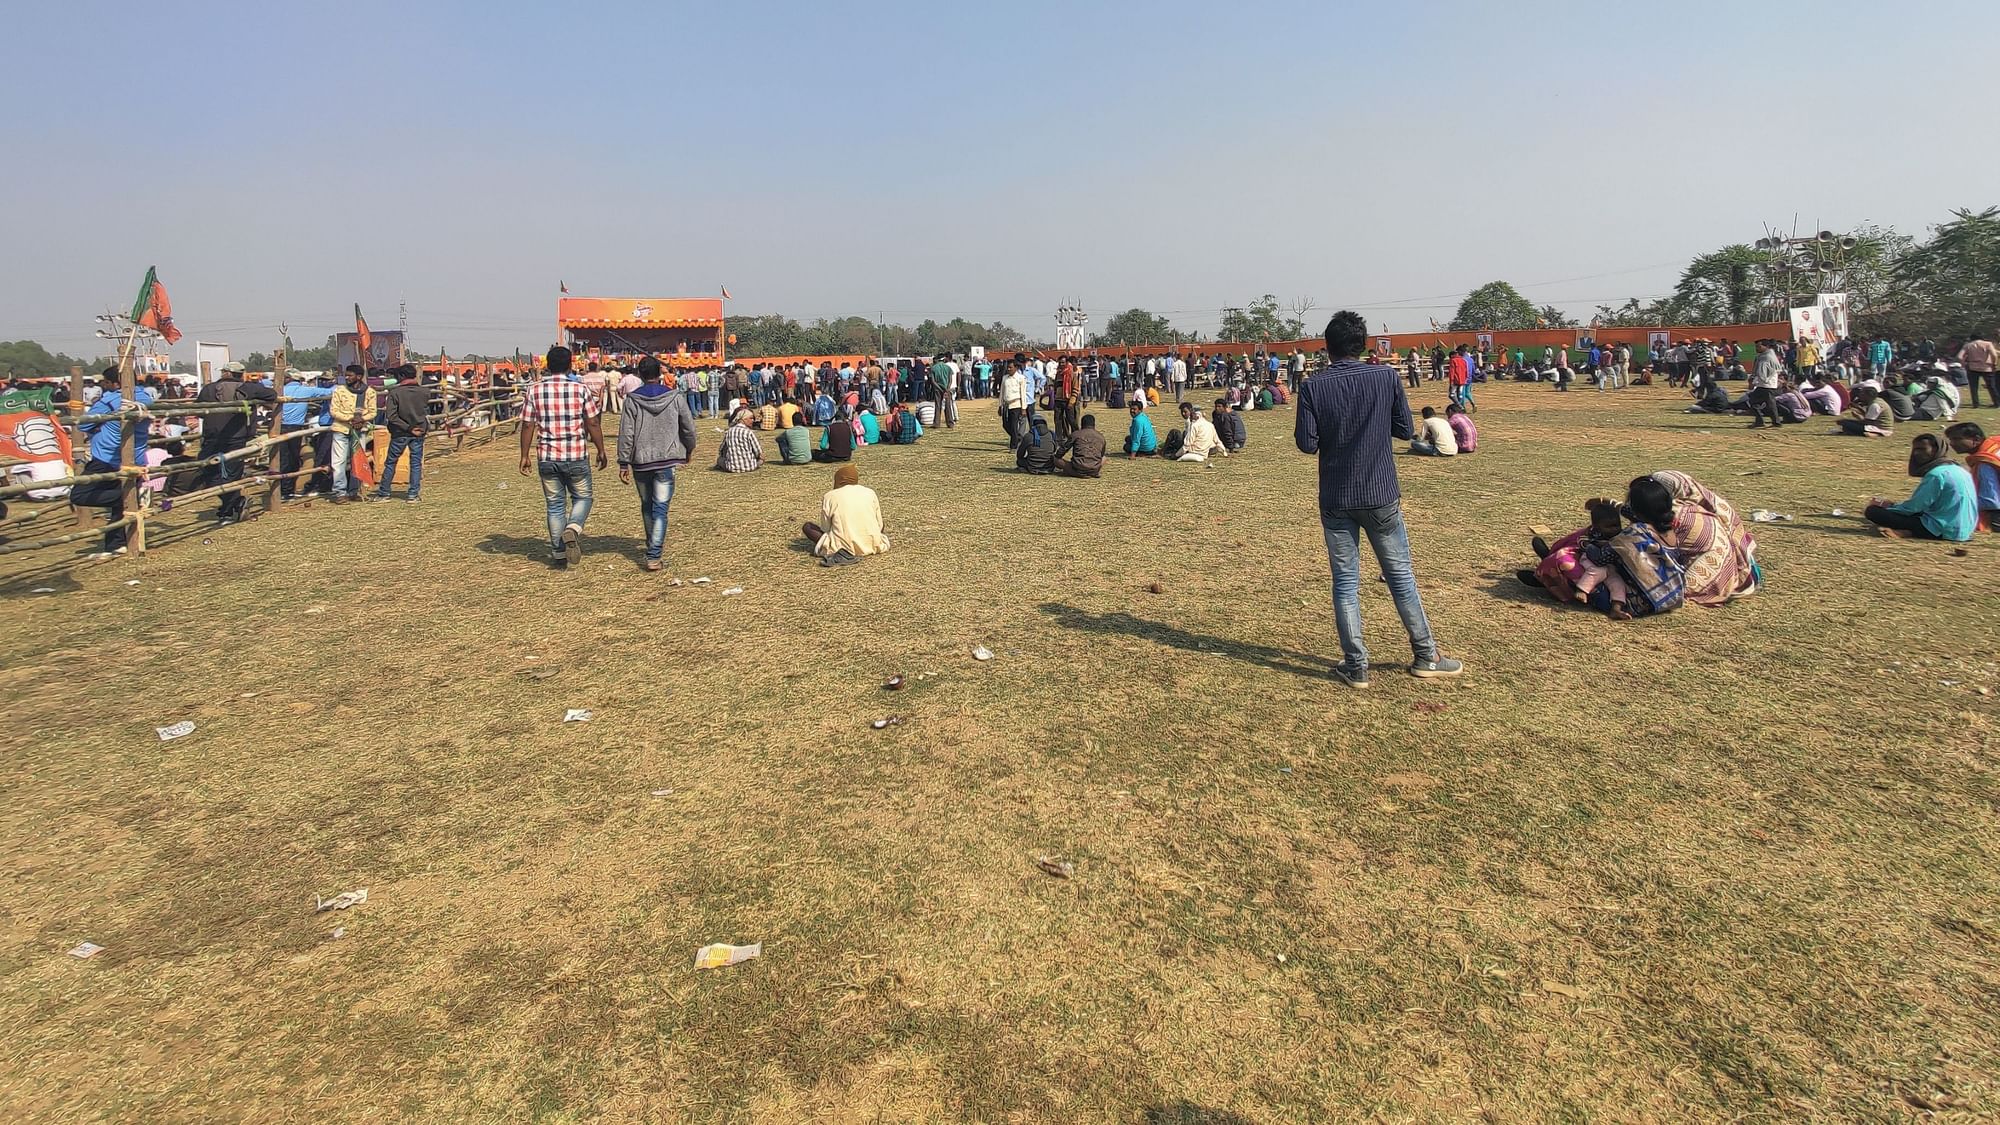 Lost In Translation: The Empty Stands At BJP's Bengal Rath Yatra